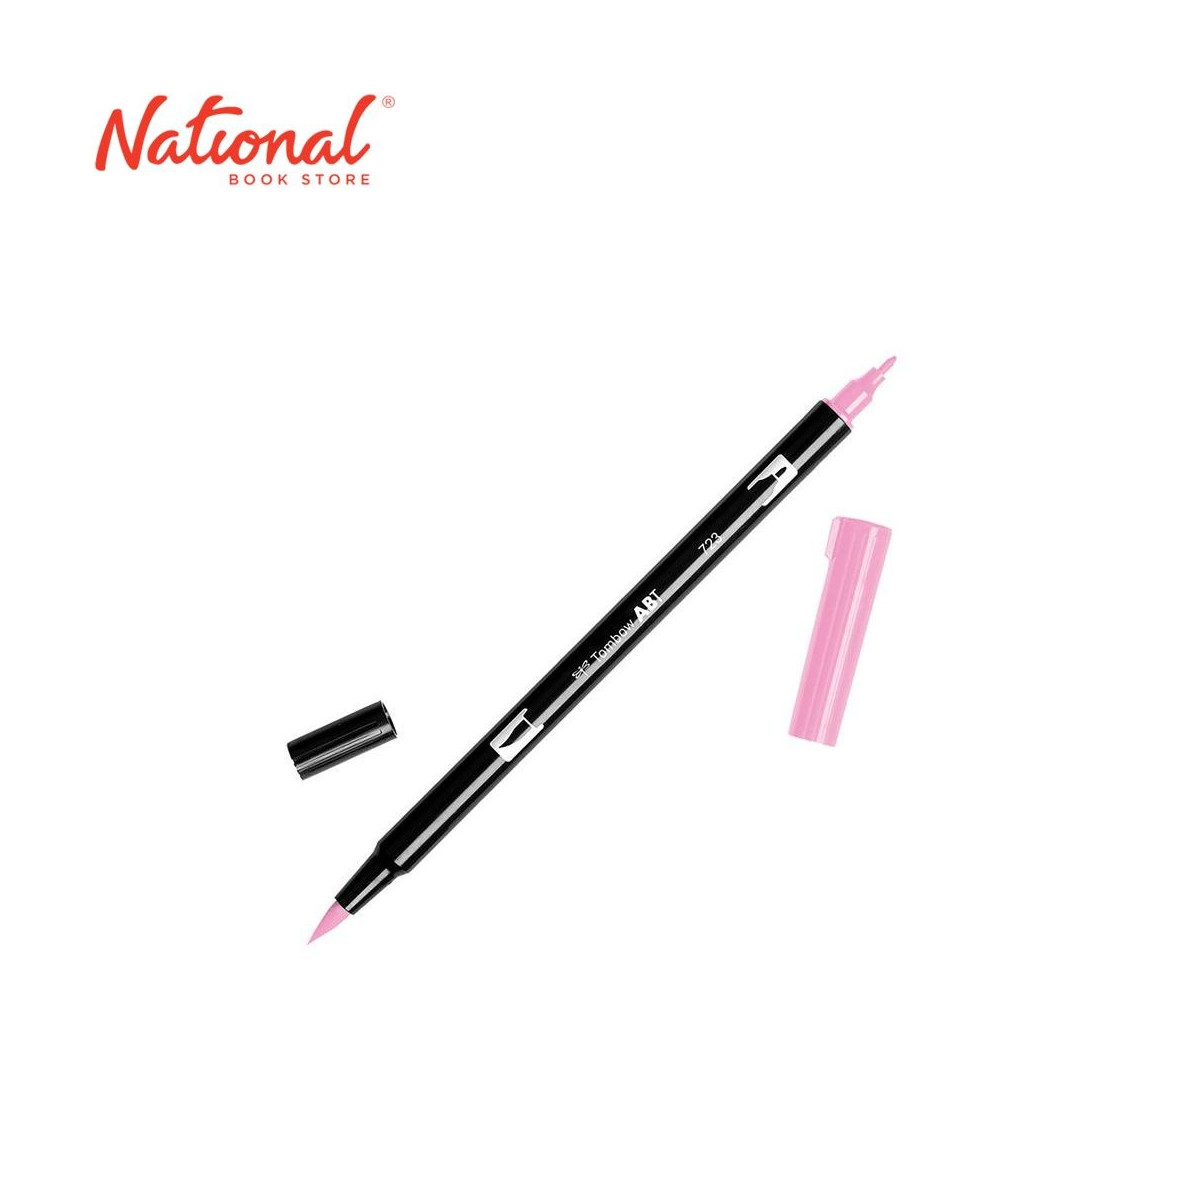 TOMBOW BRUSH MARKER ABT723 PINK